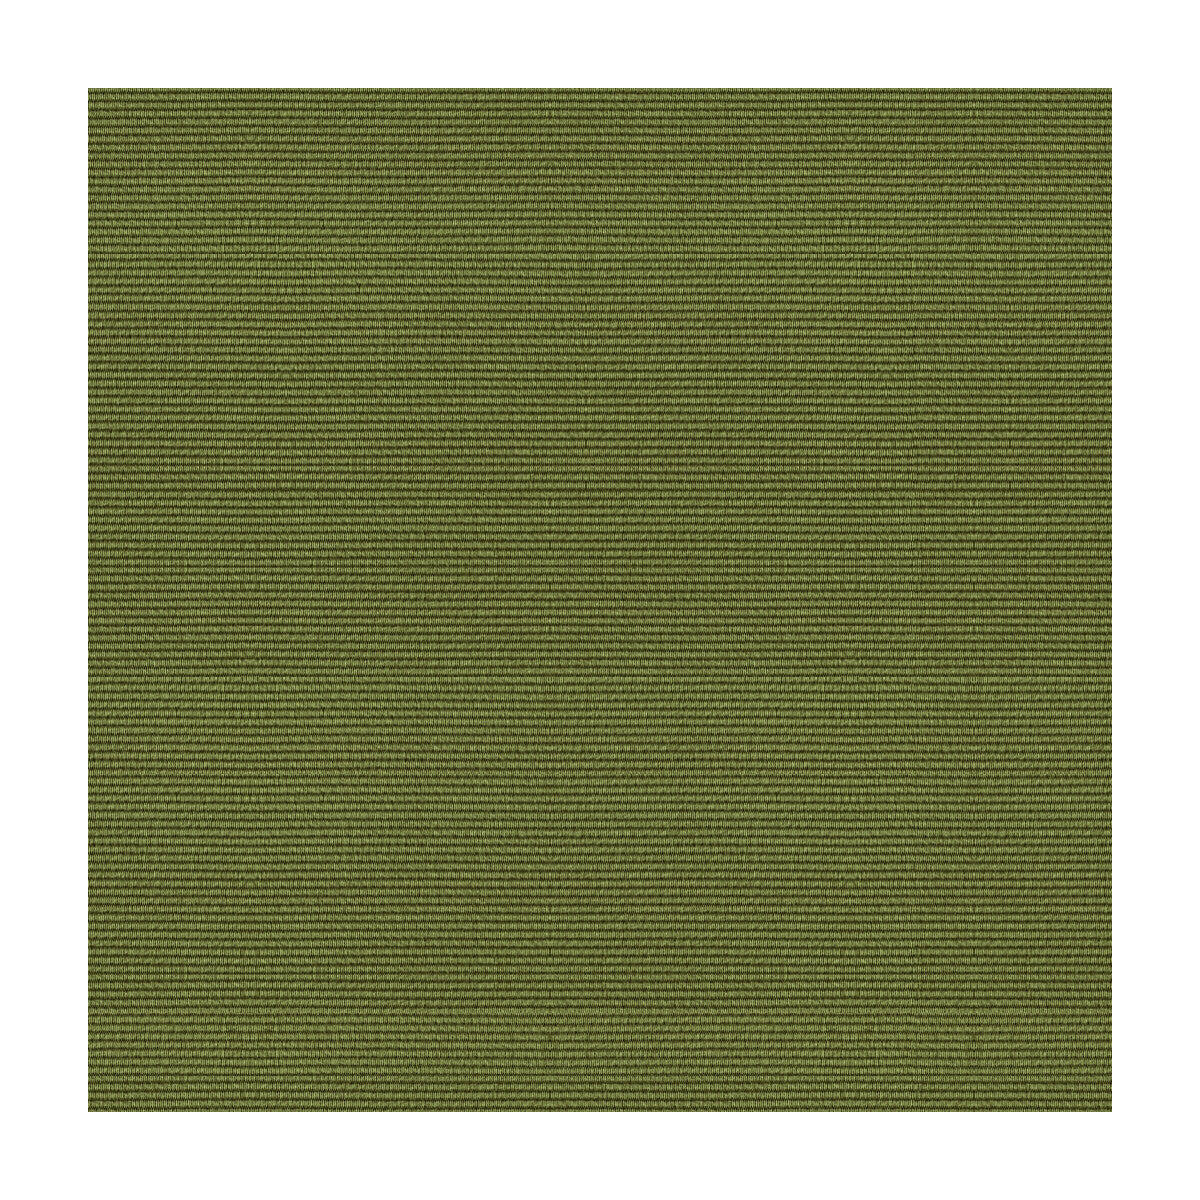 Bosporus Ottoman Texture fabric in moss color - pattern BR-83806.406.0 - by Brunschwig &amp; Fils